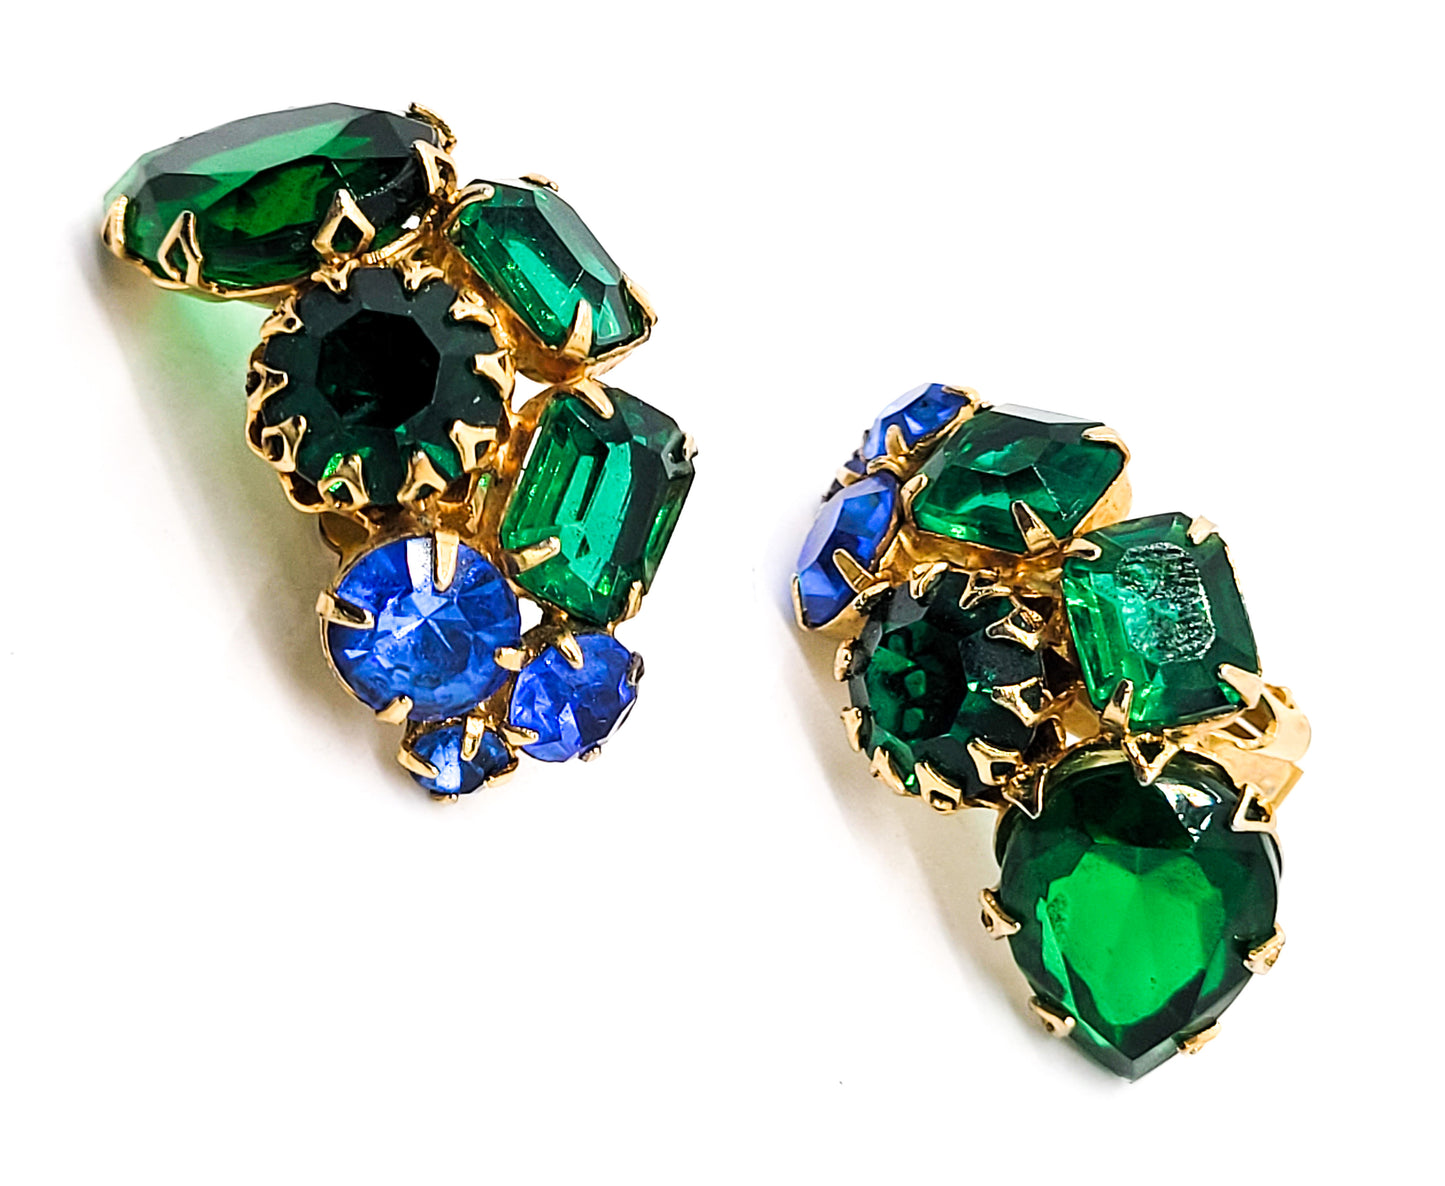 Unsigned Schreiner Blue and green pear cut large vintage rhinestone earrings